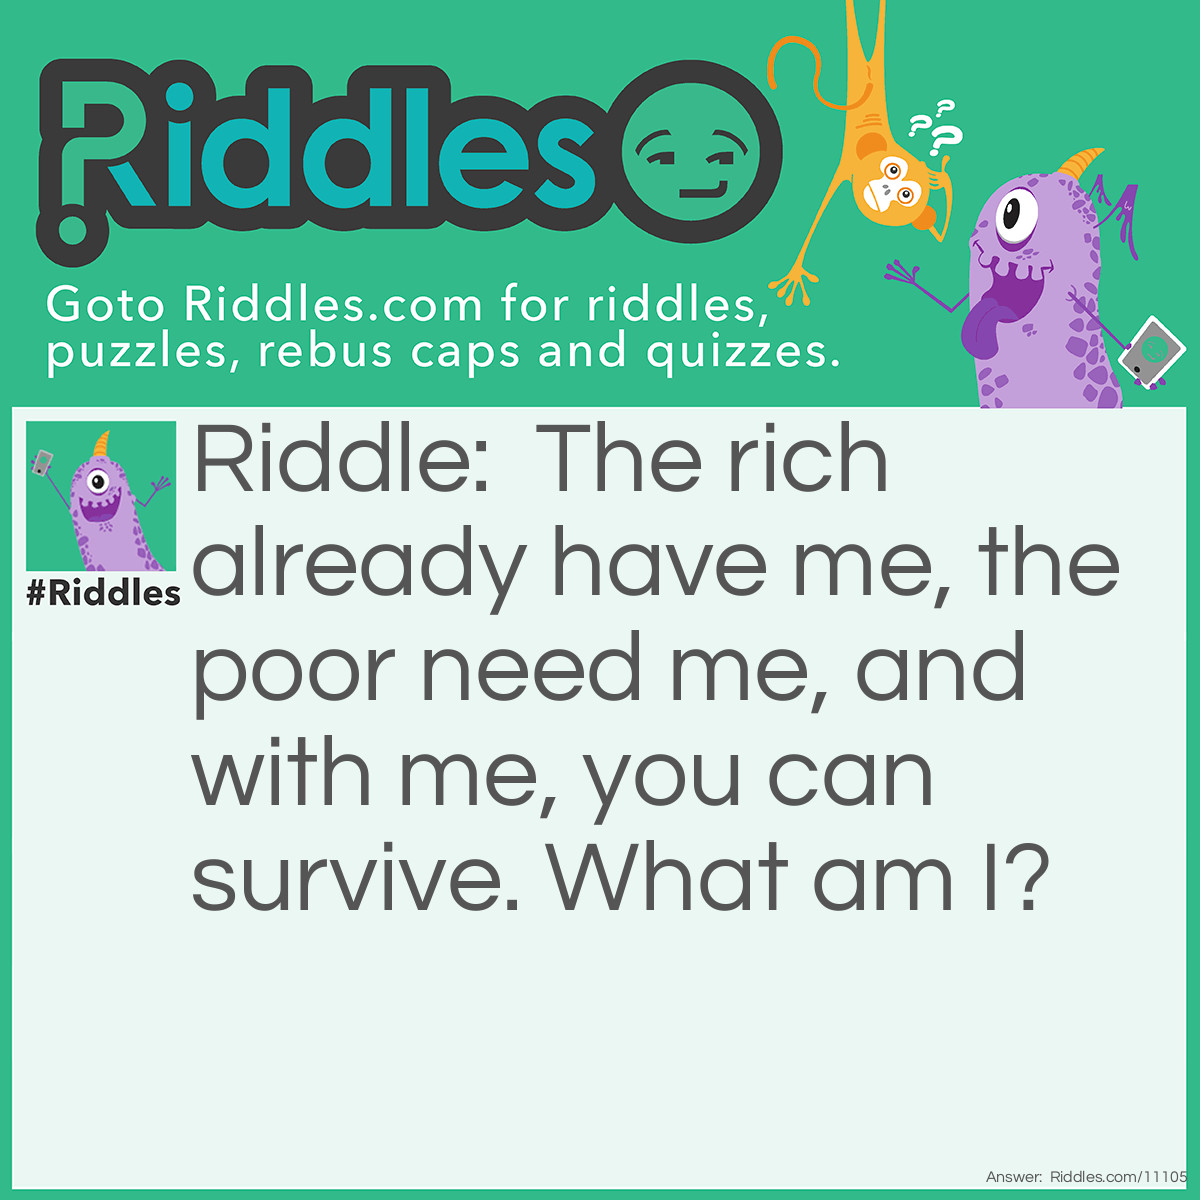 Riddle: The rich already have me, the poor need me, and with me, you can survive. What am I? Answer: Wealth or money.